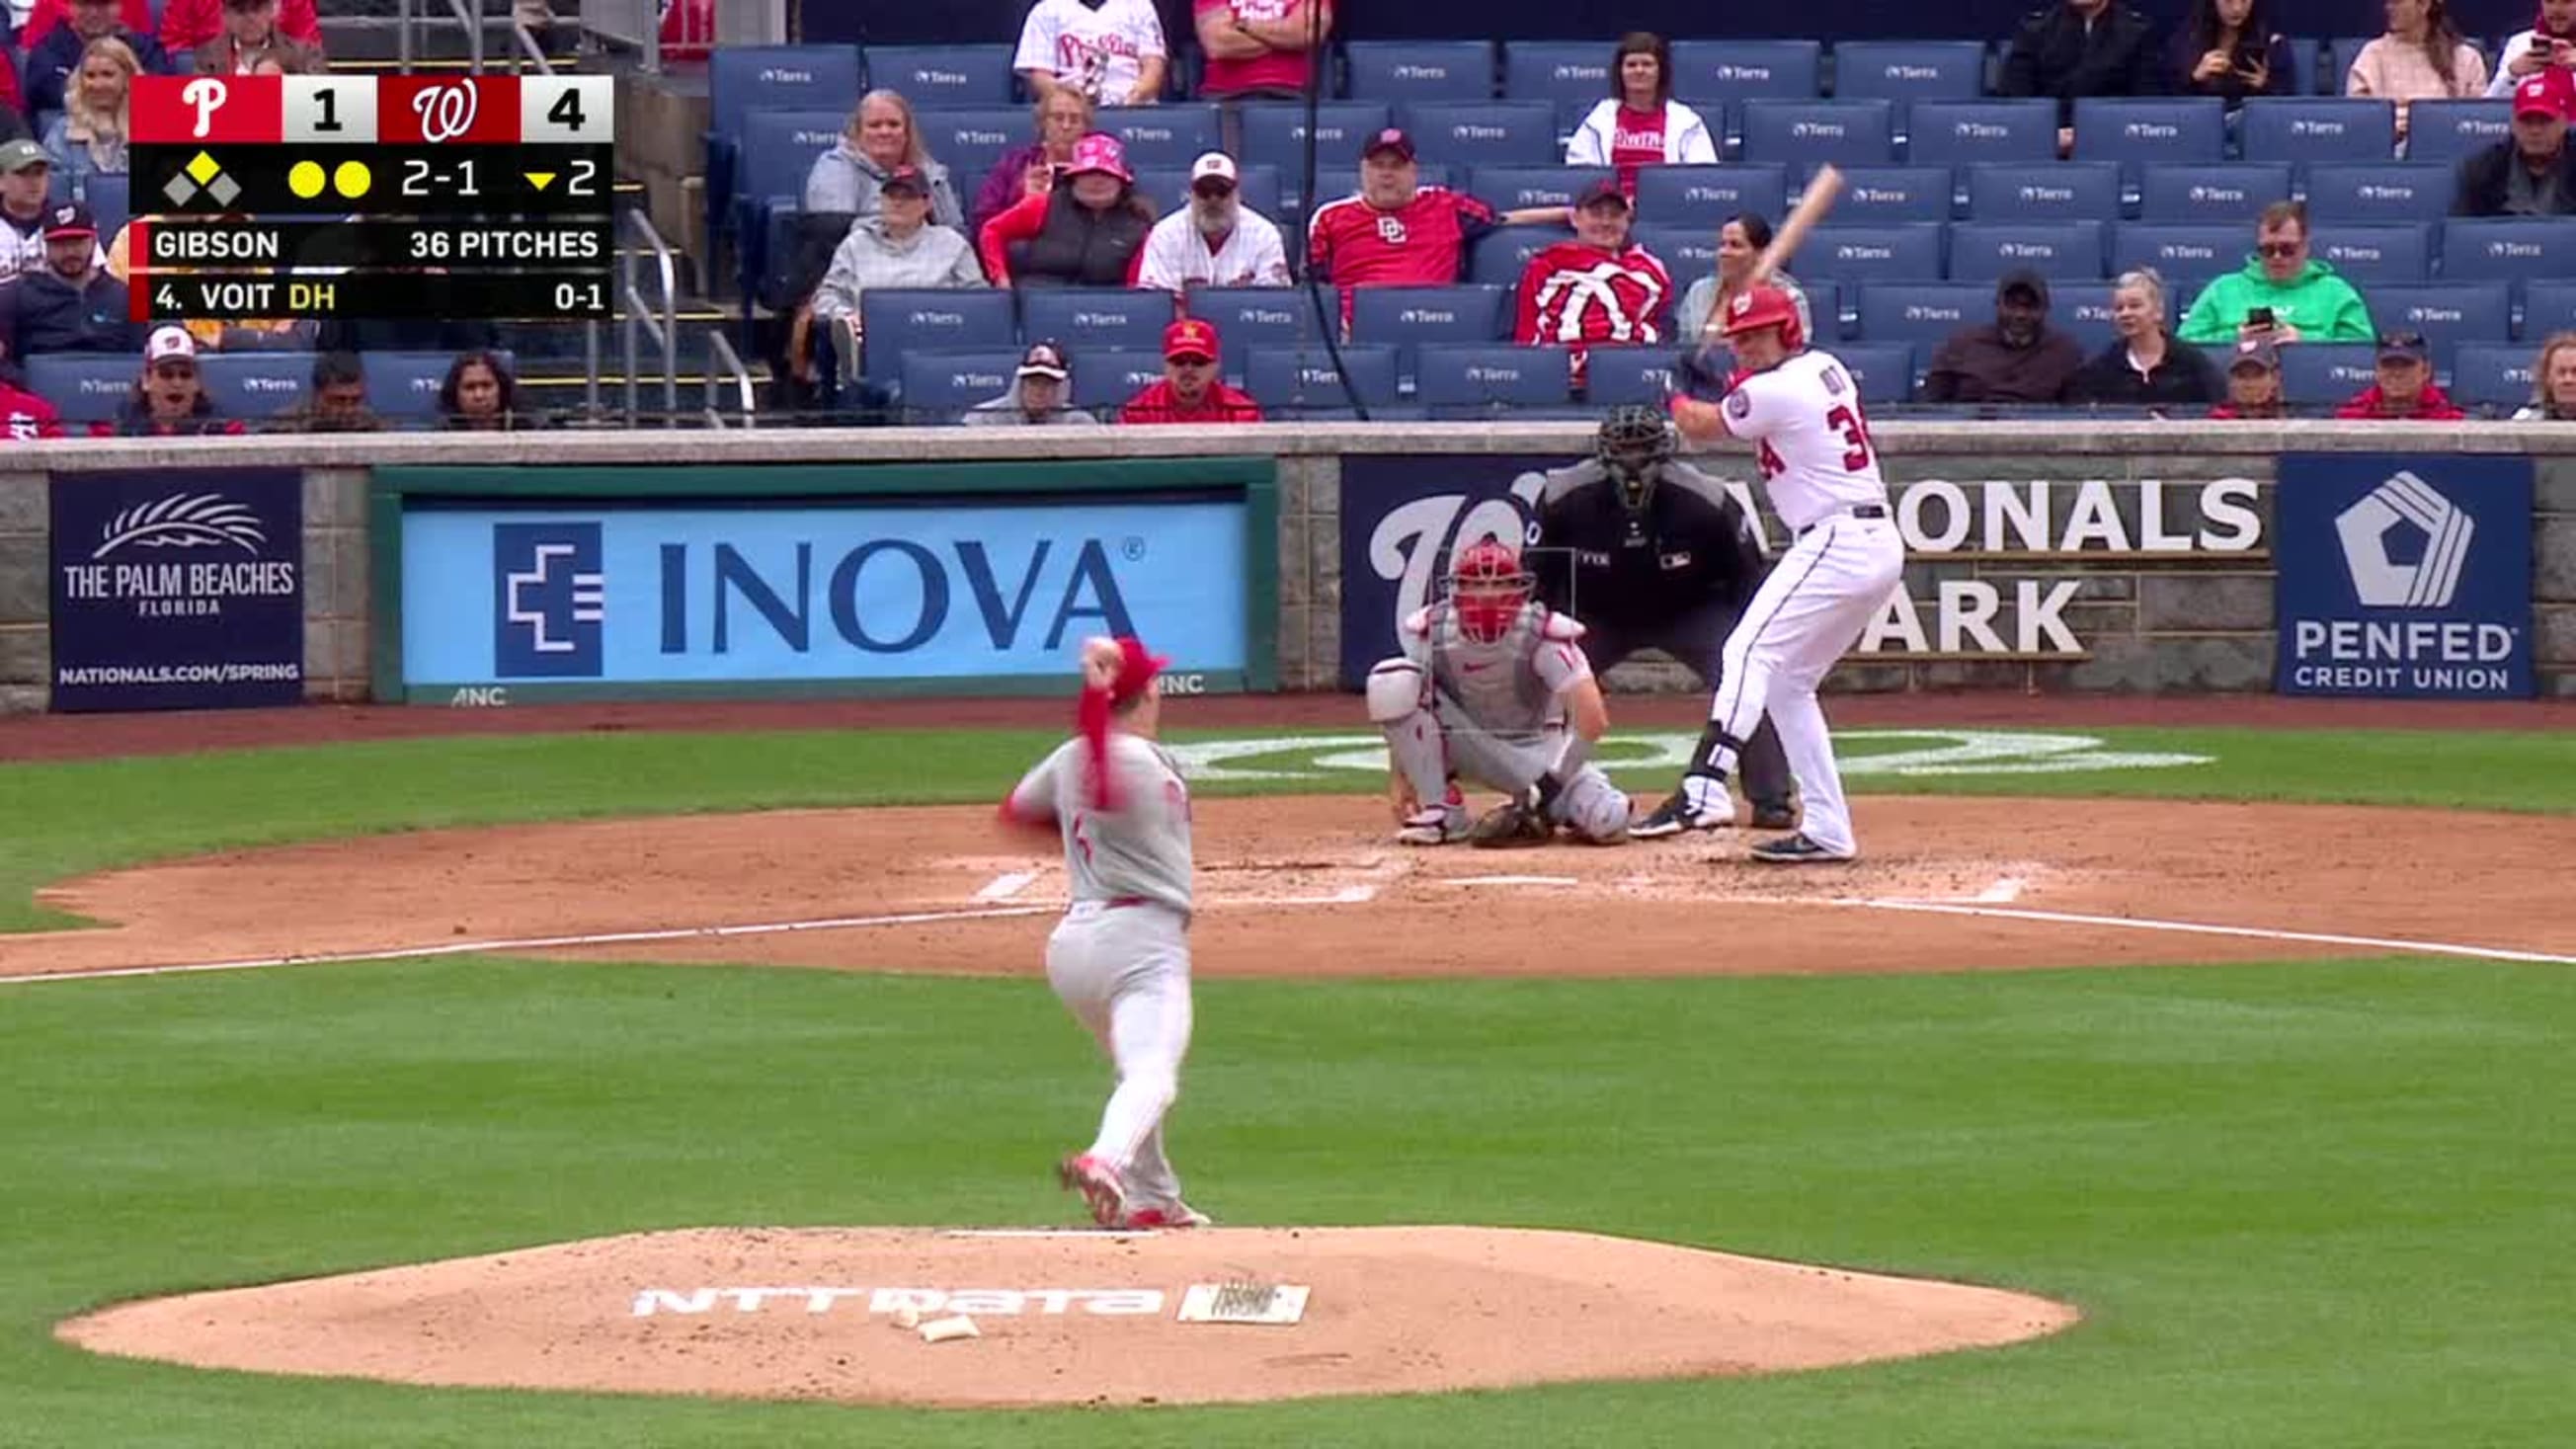 ✓ Luke Voit ✓ Theme jersey ✓ Hijinks He catches a pitch… while batting  #SCTop10